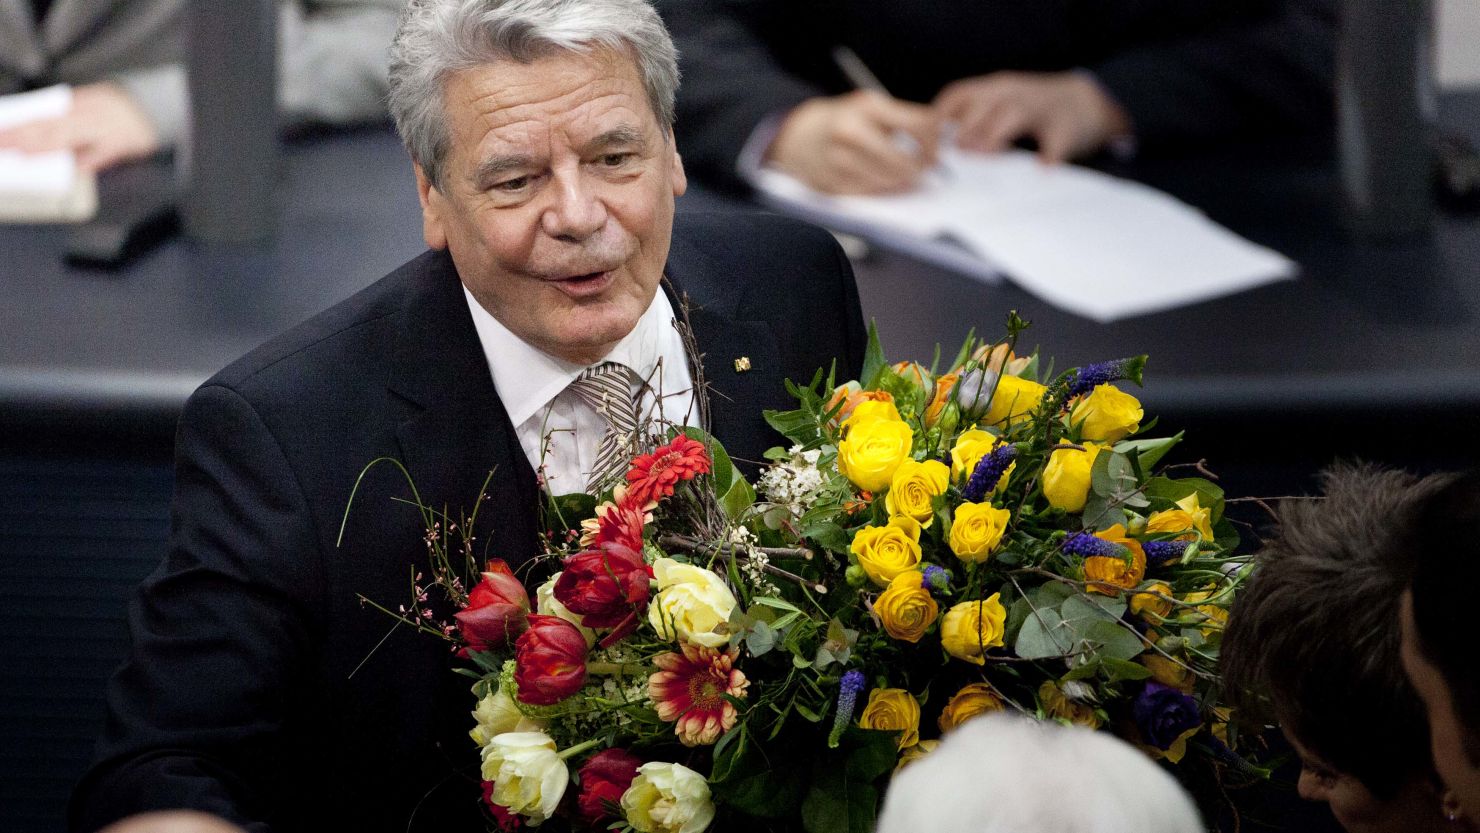 Joachim Gauck is congratulated by members of the Bundestag after being elected German president.